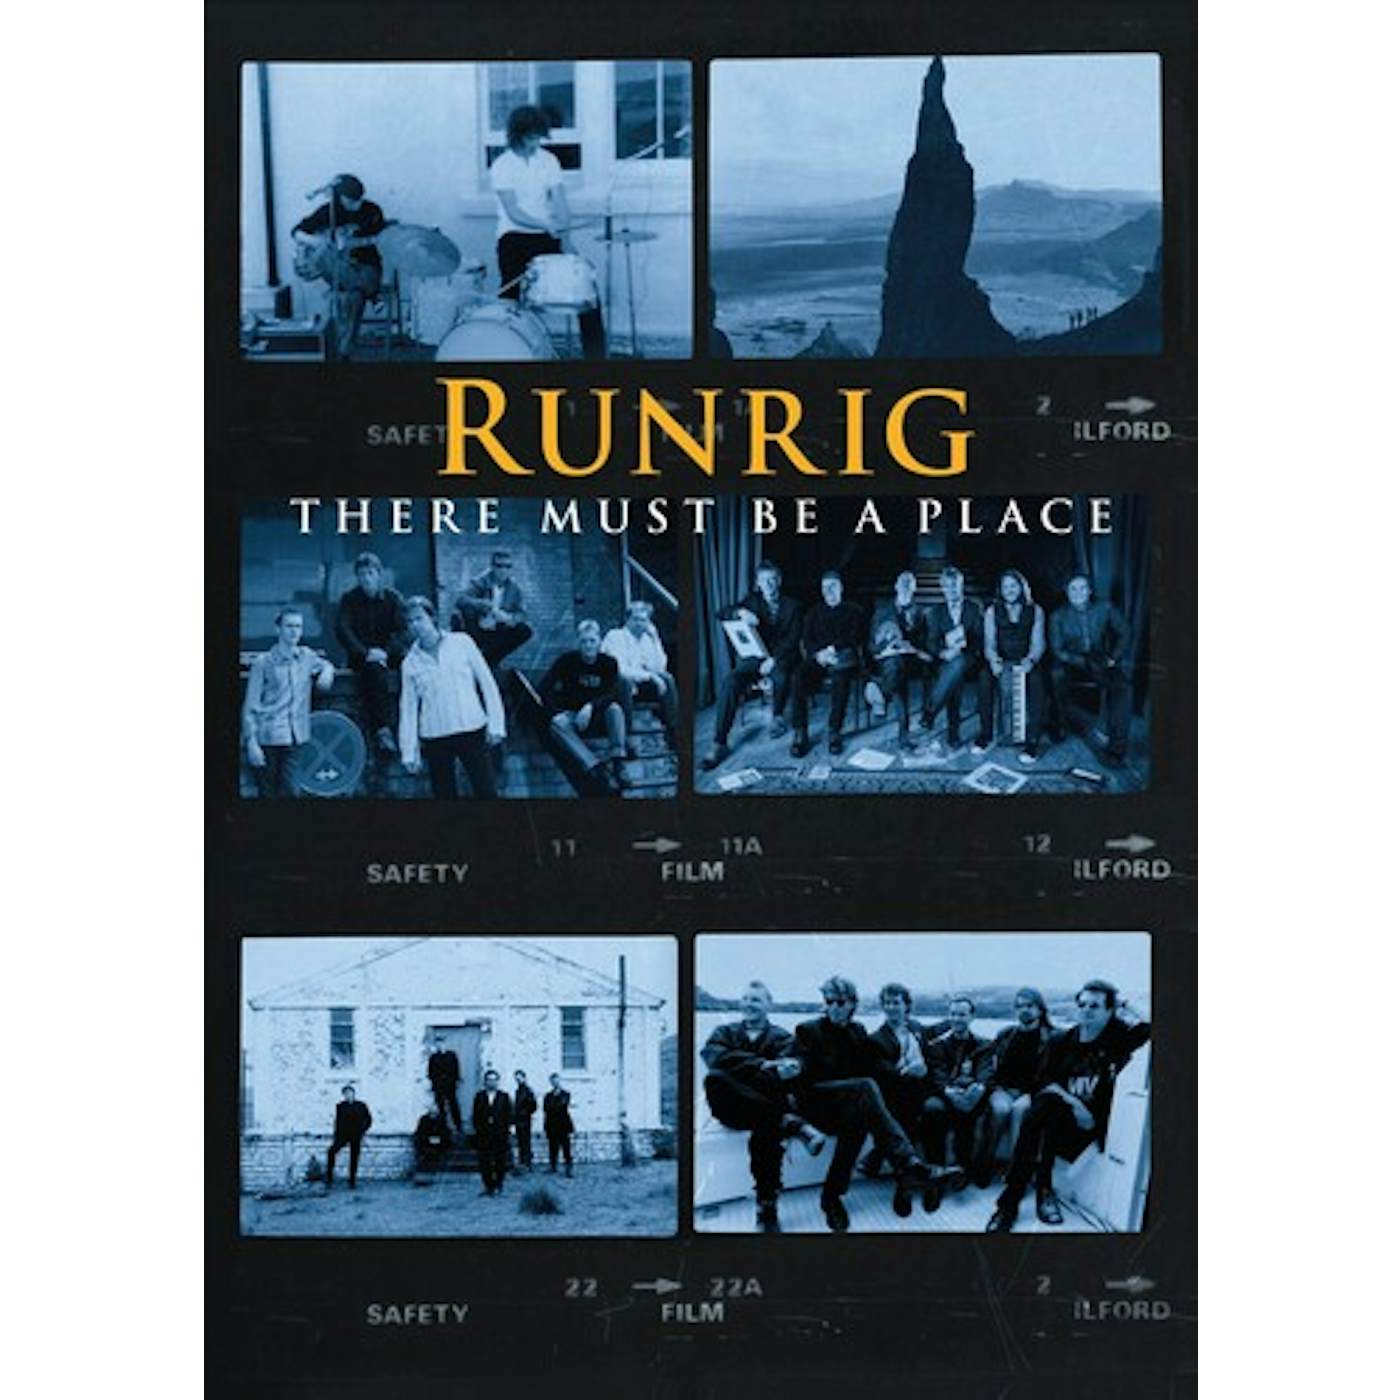 Runrig THERE MUST BE A PLACE DVD